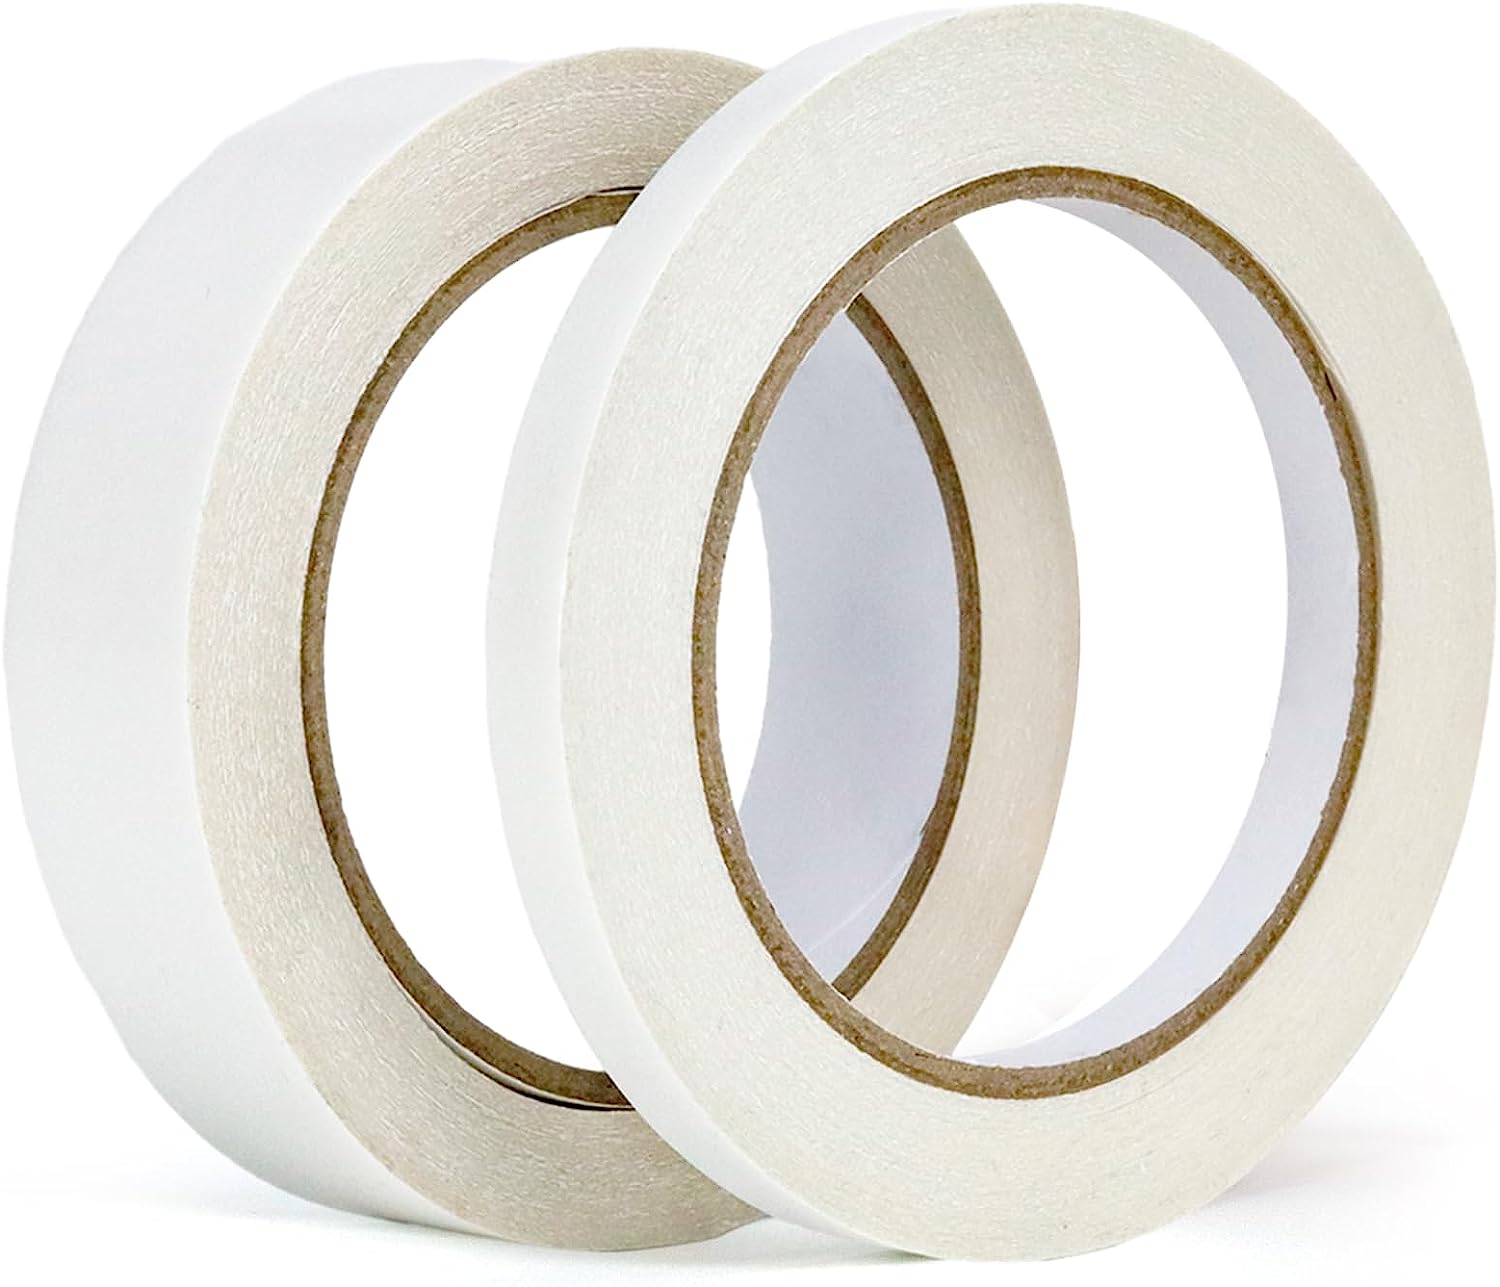 PLANTIONAL Double-Sided Sticky Fabric Tape, Two Rolls [...]